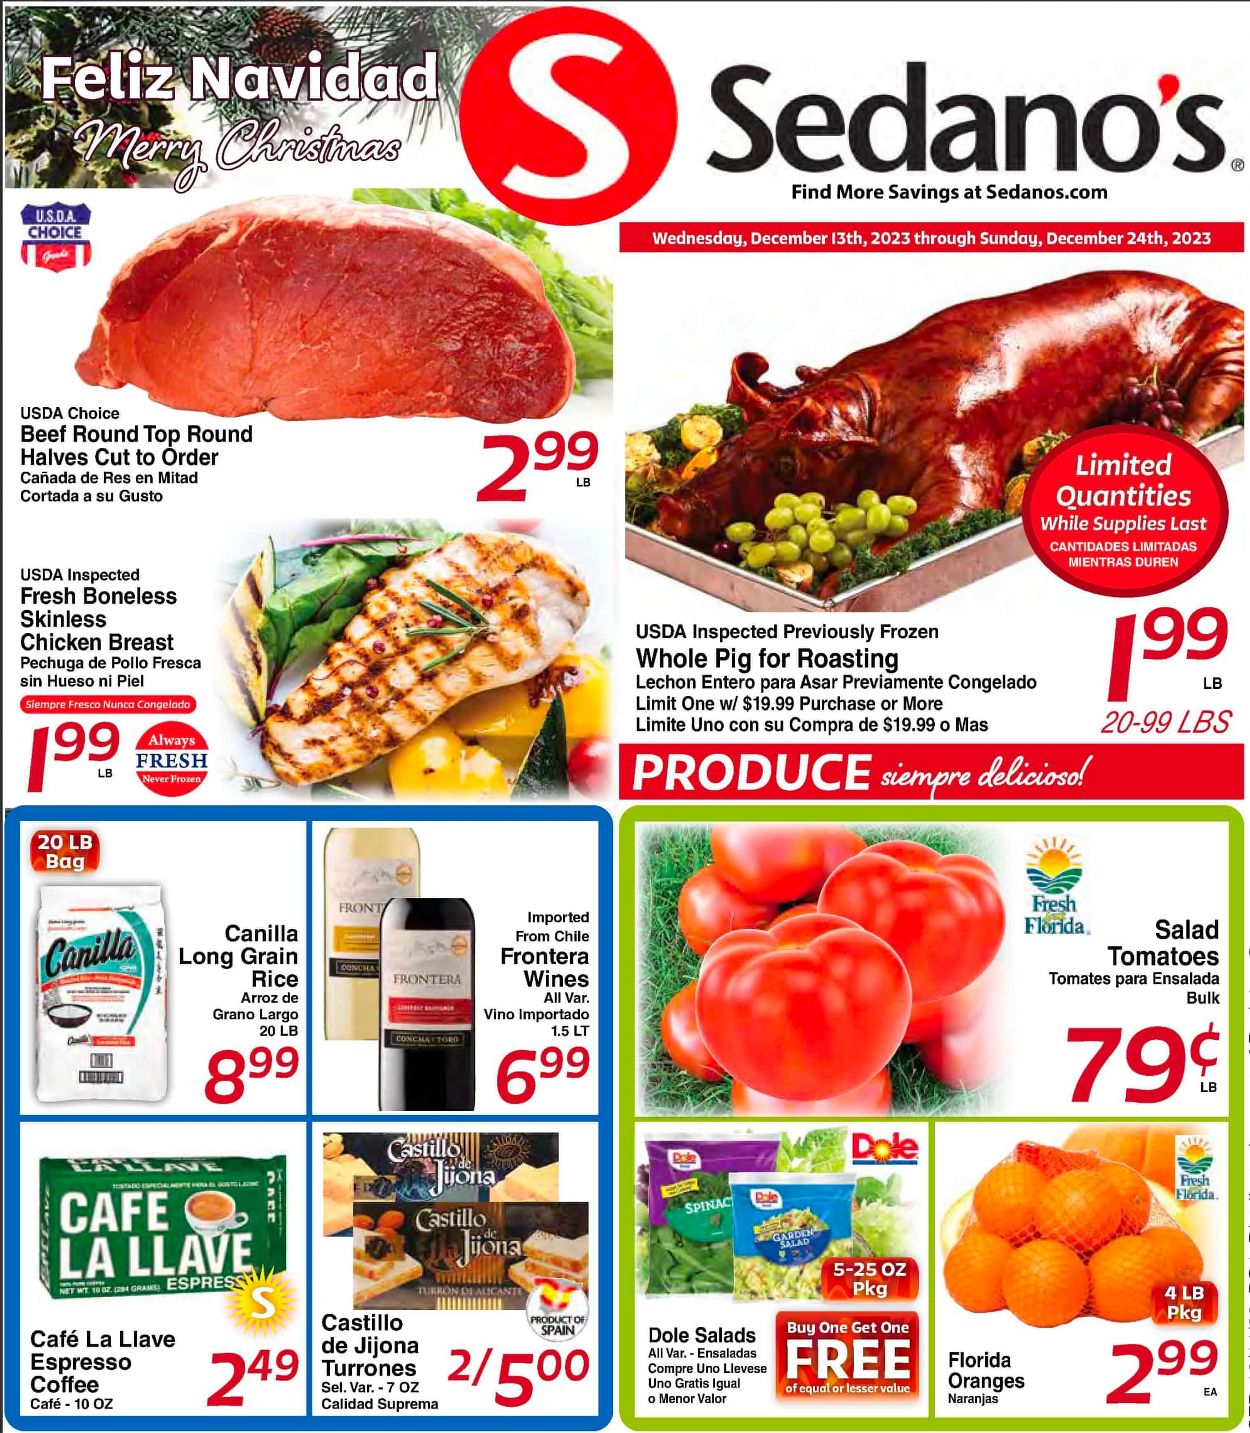 Sedano's Christmas July 2024 Weekly Sales, Deals, Discounts and Digital Coupons.